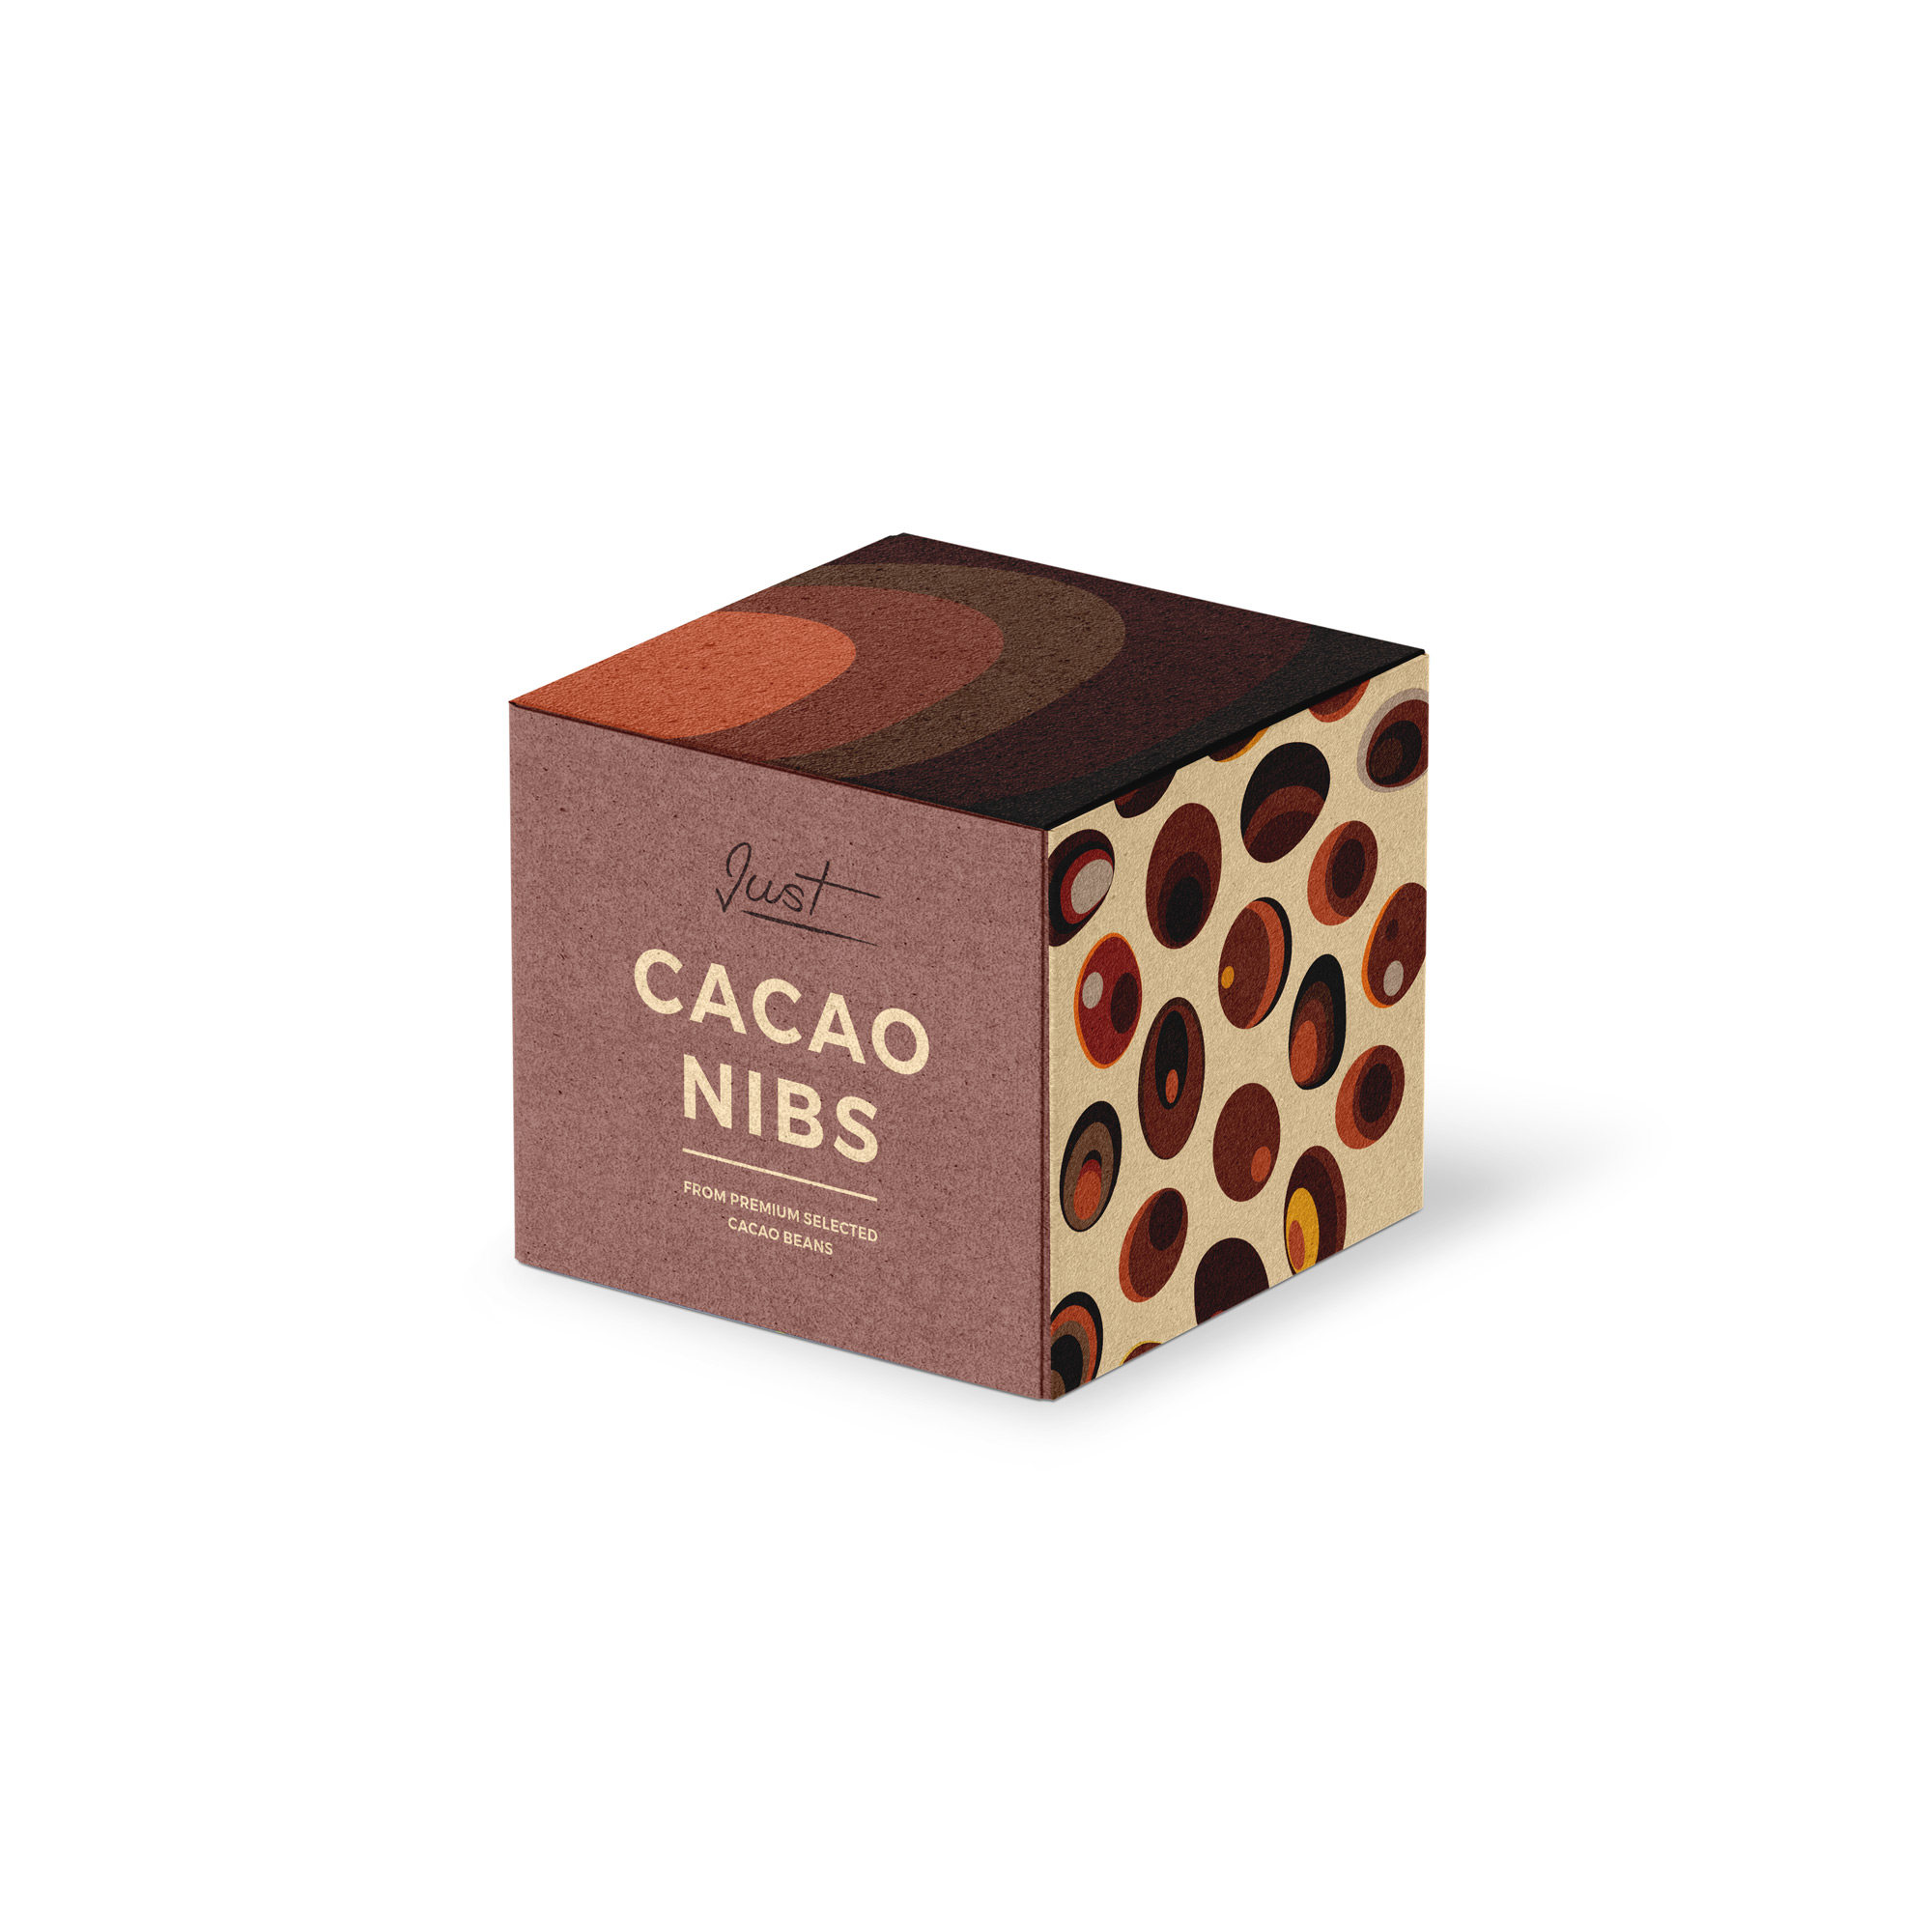 Cacao Nibs By Roger Briz On Dribbble